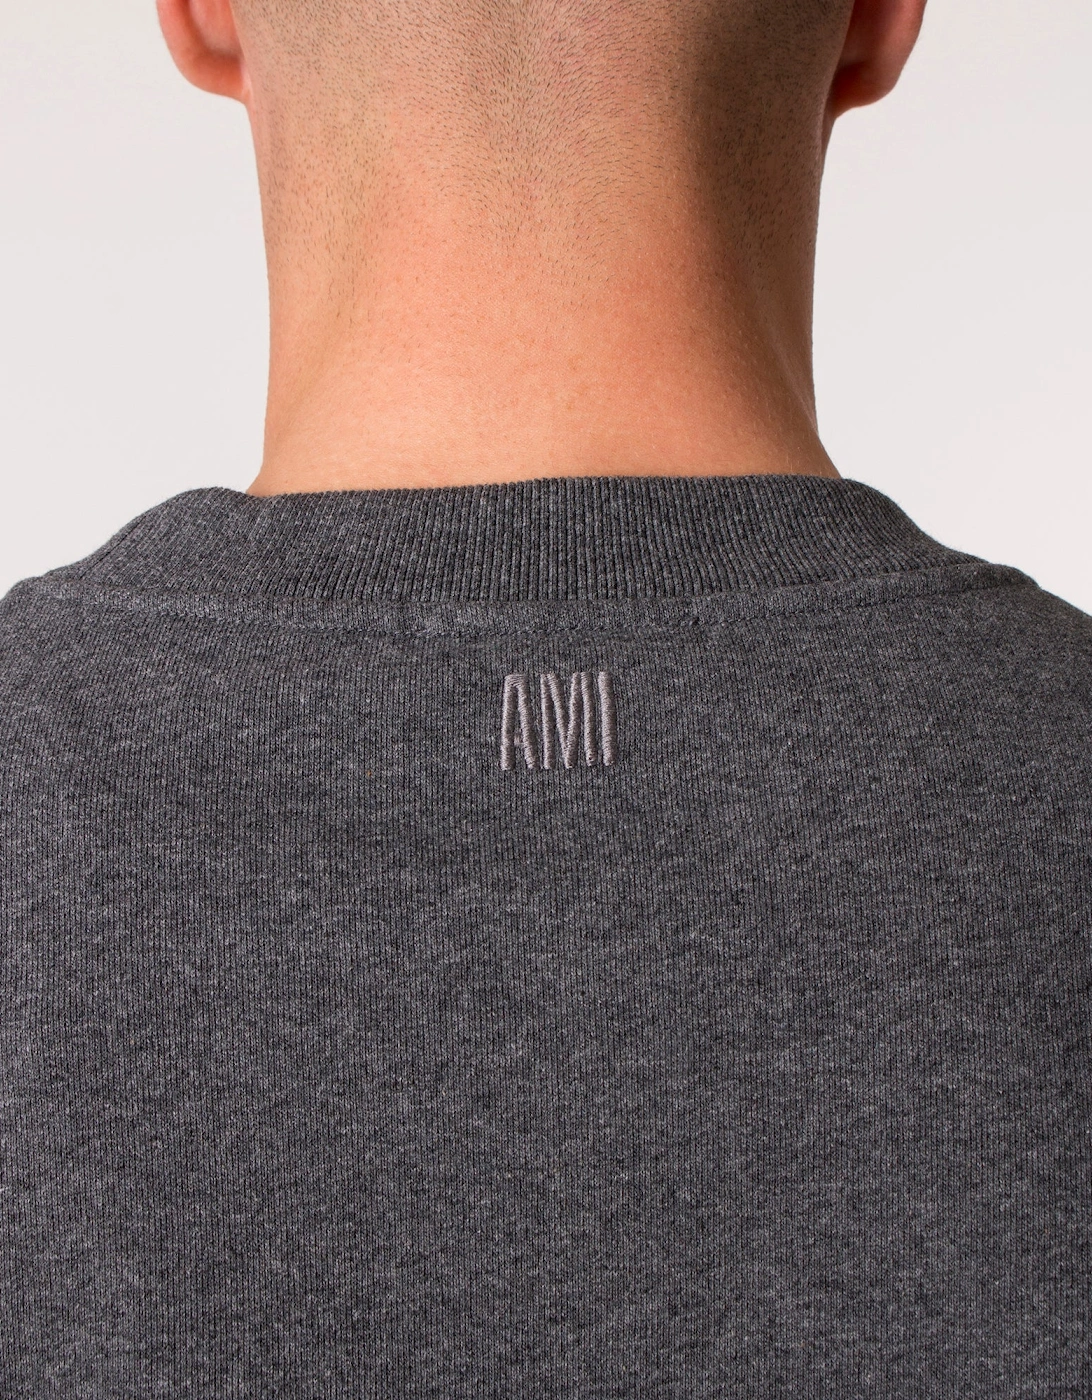 Relaxed Fit ADC Patch Sweatshirt